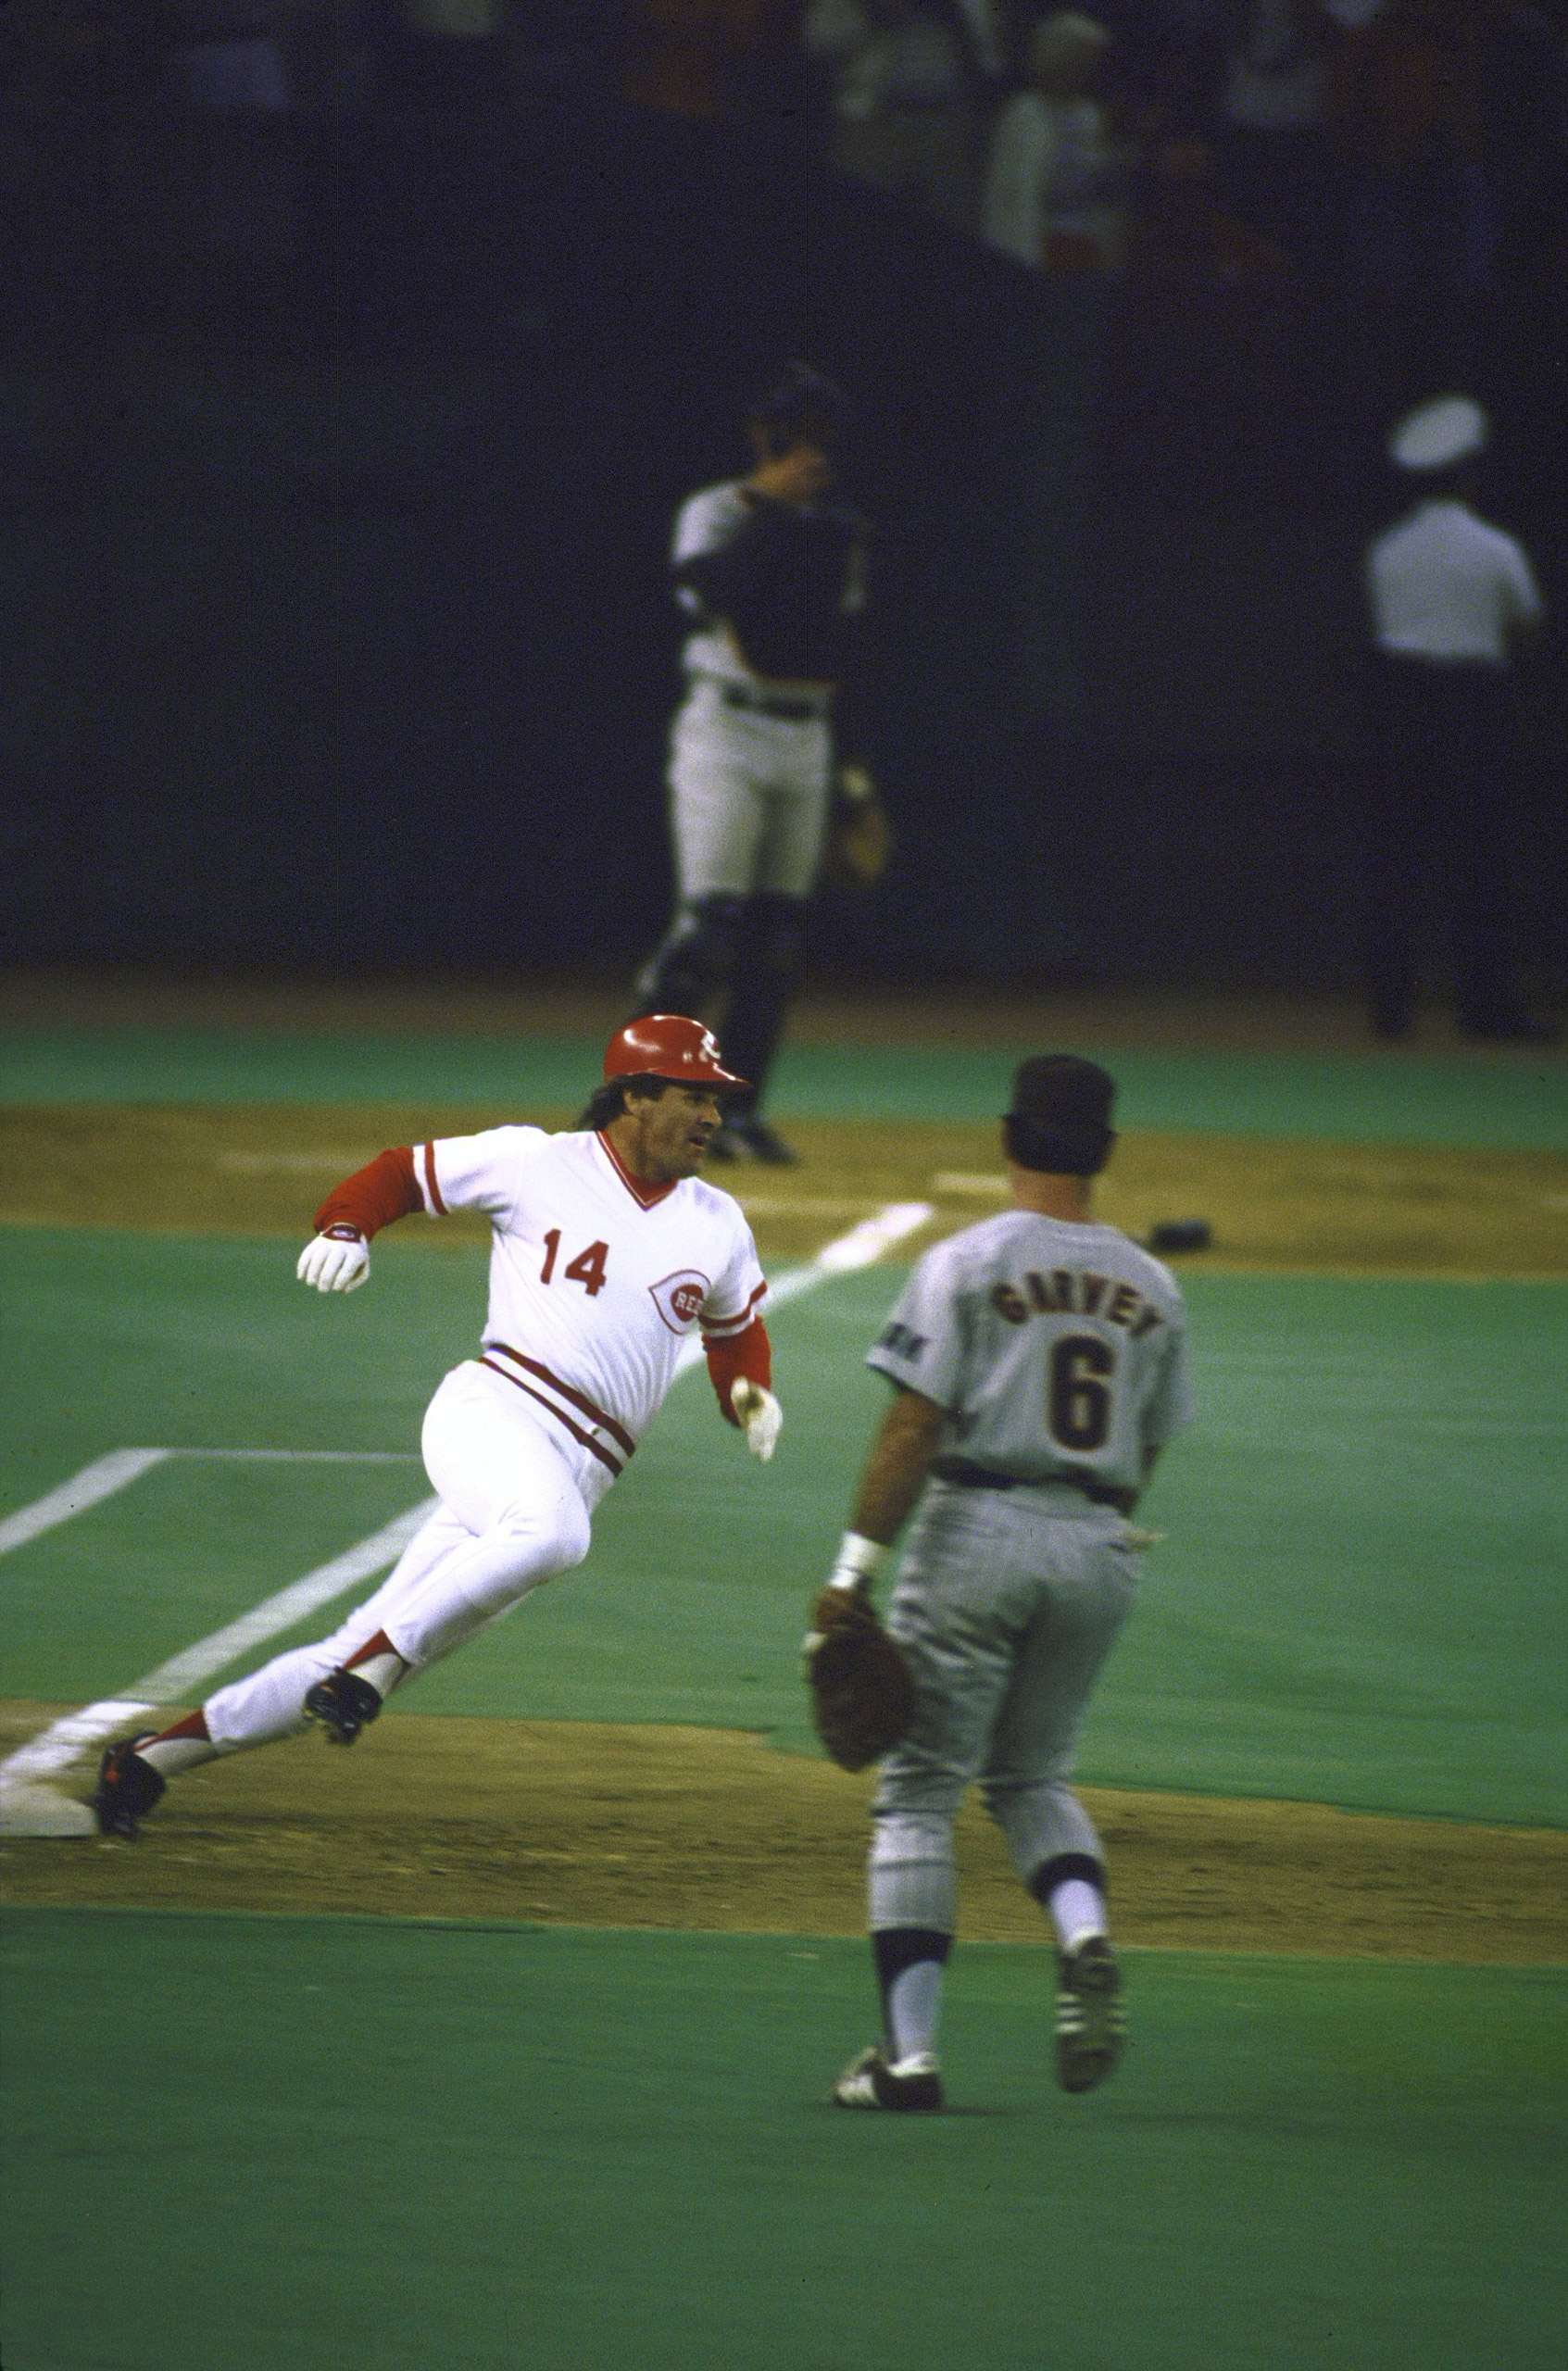 Cincinnati Reds Pete Rose (14) in action, rounding 1st base after setting hitting record with No 4192 career hit during game vs San Diego Padres.